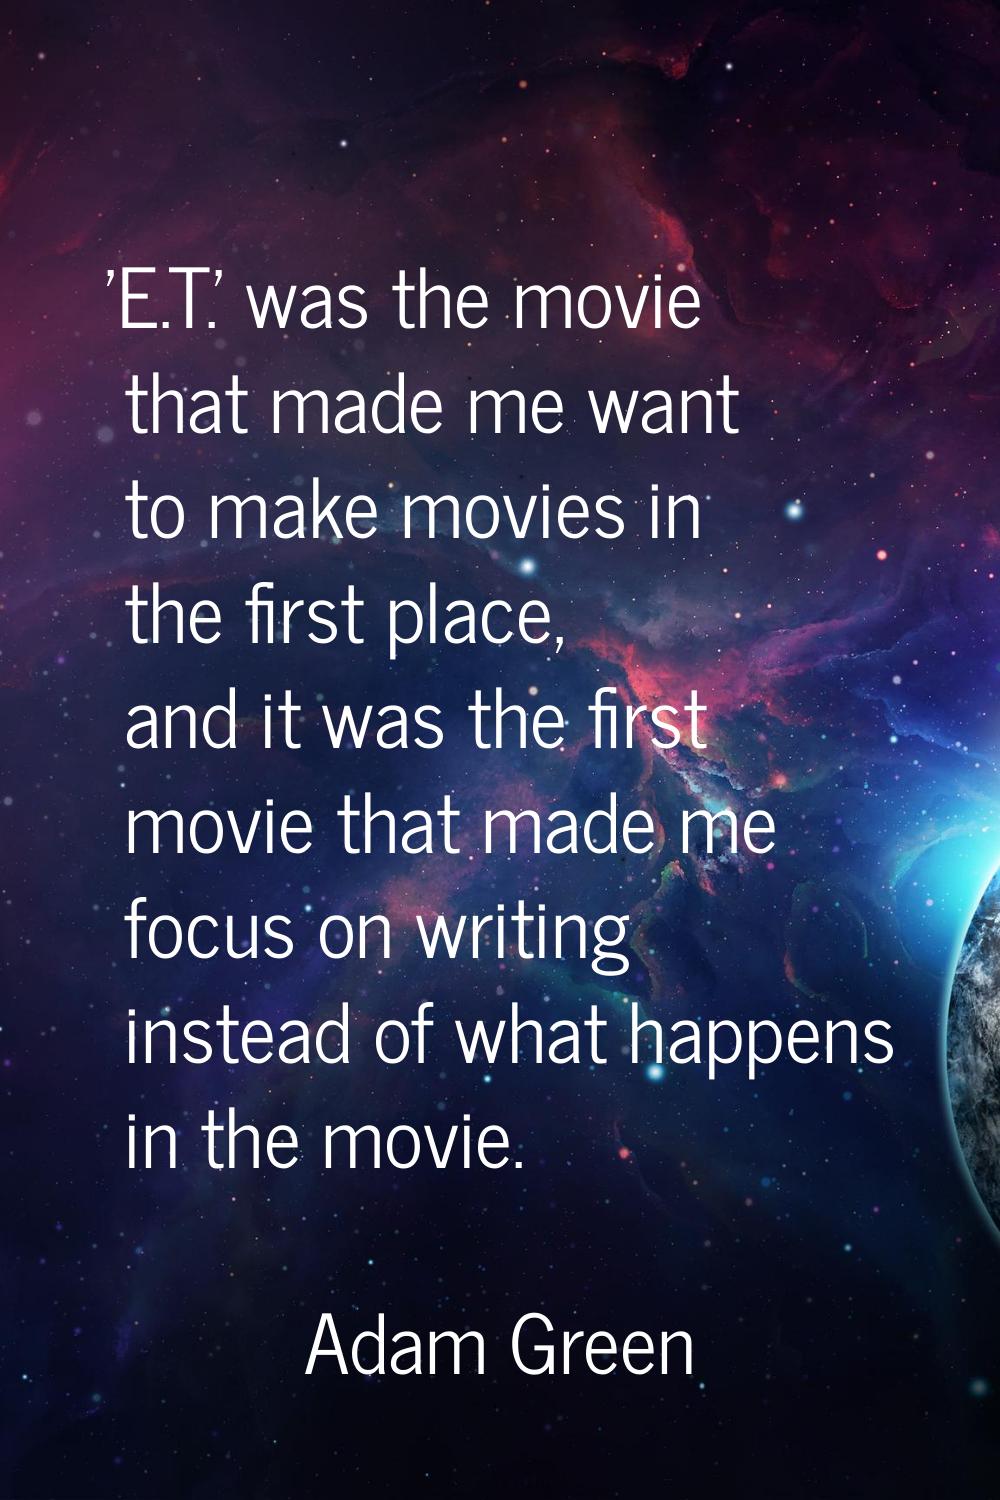 'E.T.' was the movie that made me want to make movies in the first place, and it was the first movi